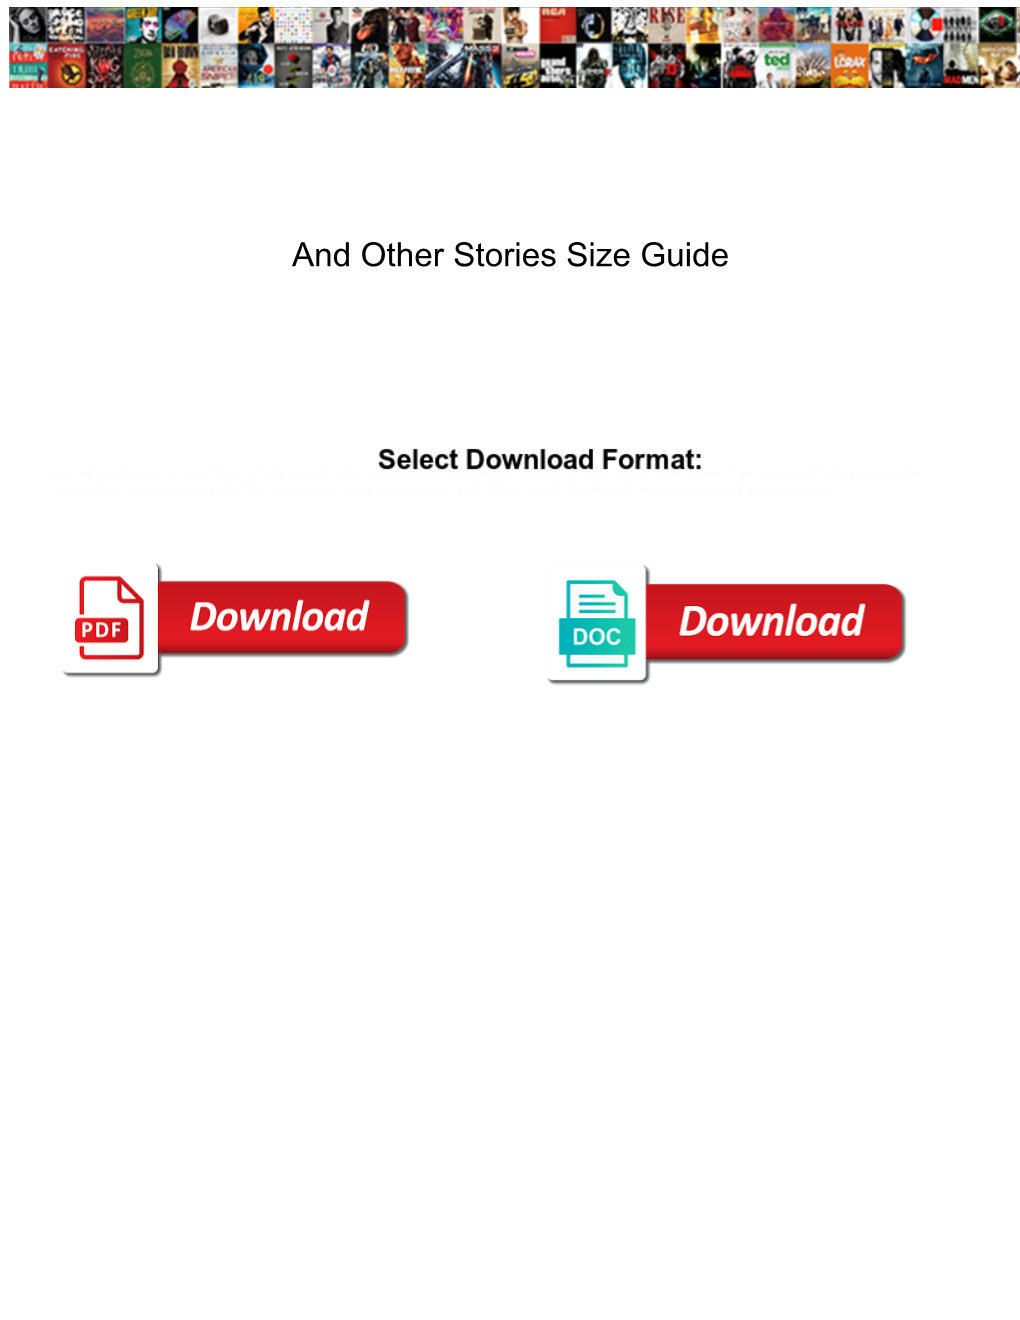 And Other Stories Size Guide